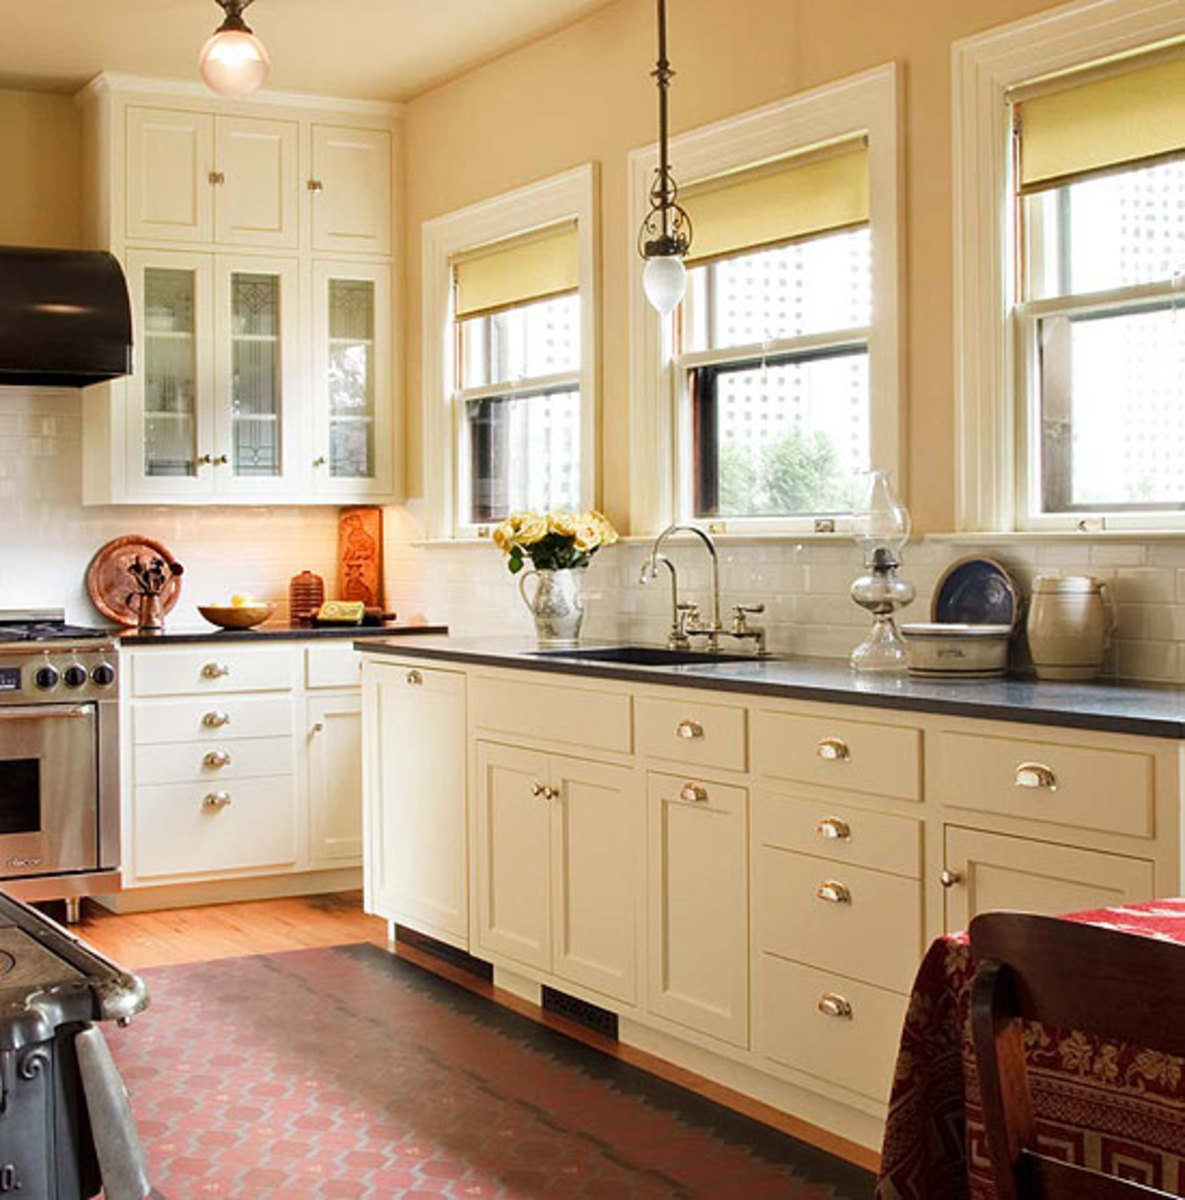 Kitchen Sinks & Countertops: Go Trendy or Timeless? - Arts ...